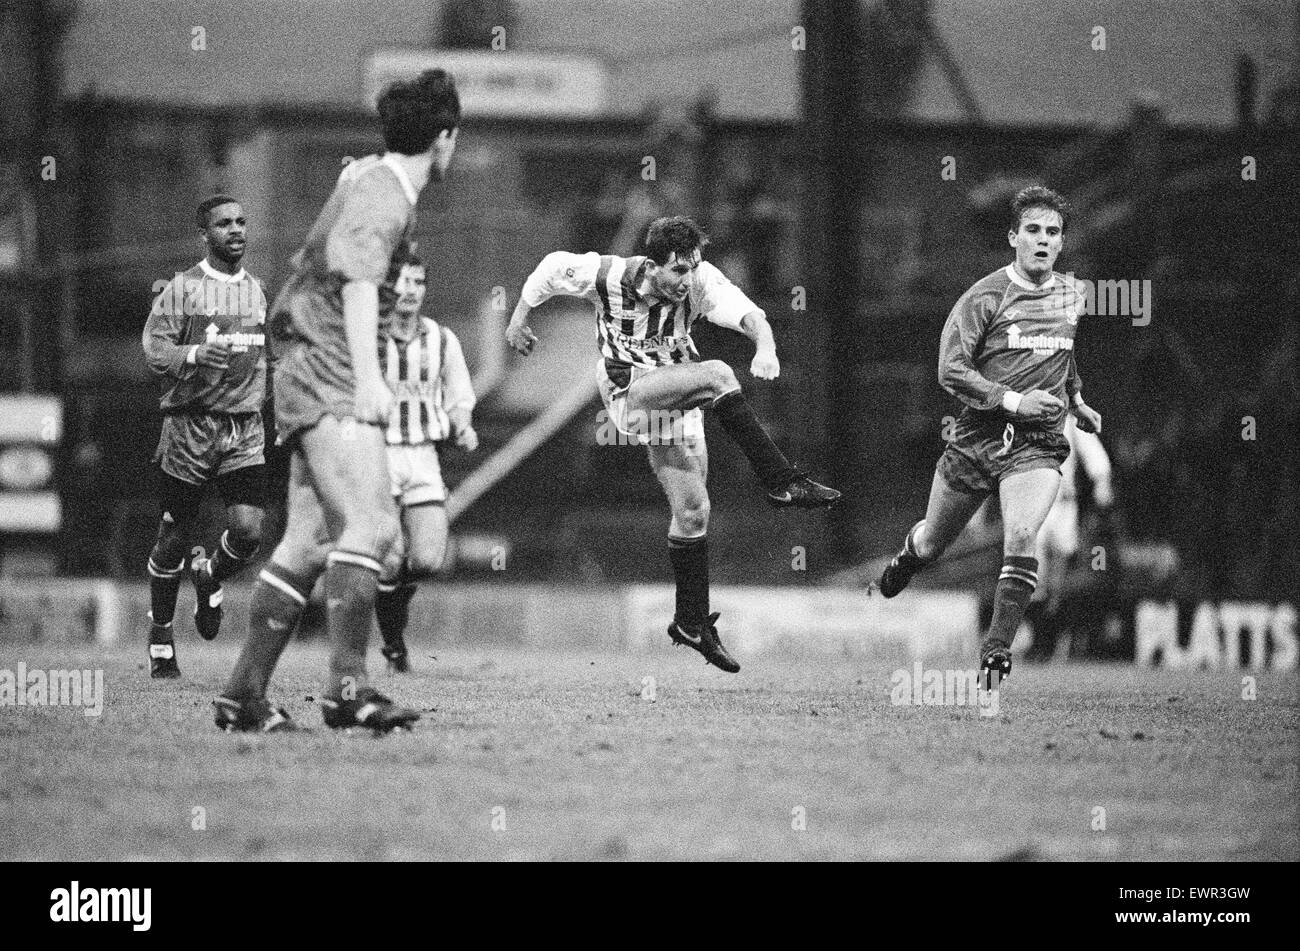 Huddersfield 2-1 Bury, Division 3 League match at Leeds Road, Saturday 22nd December 1990. Stock Photo